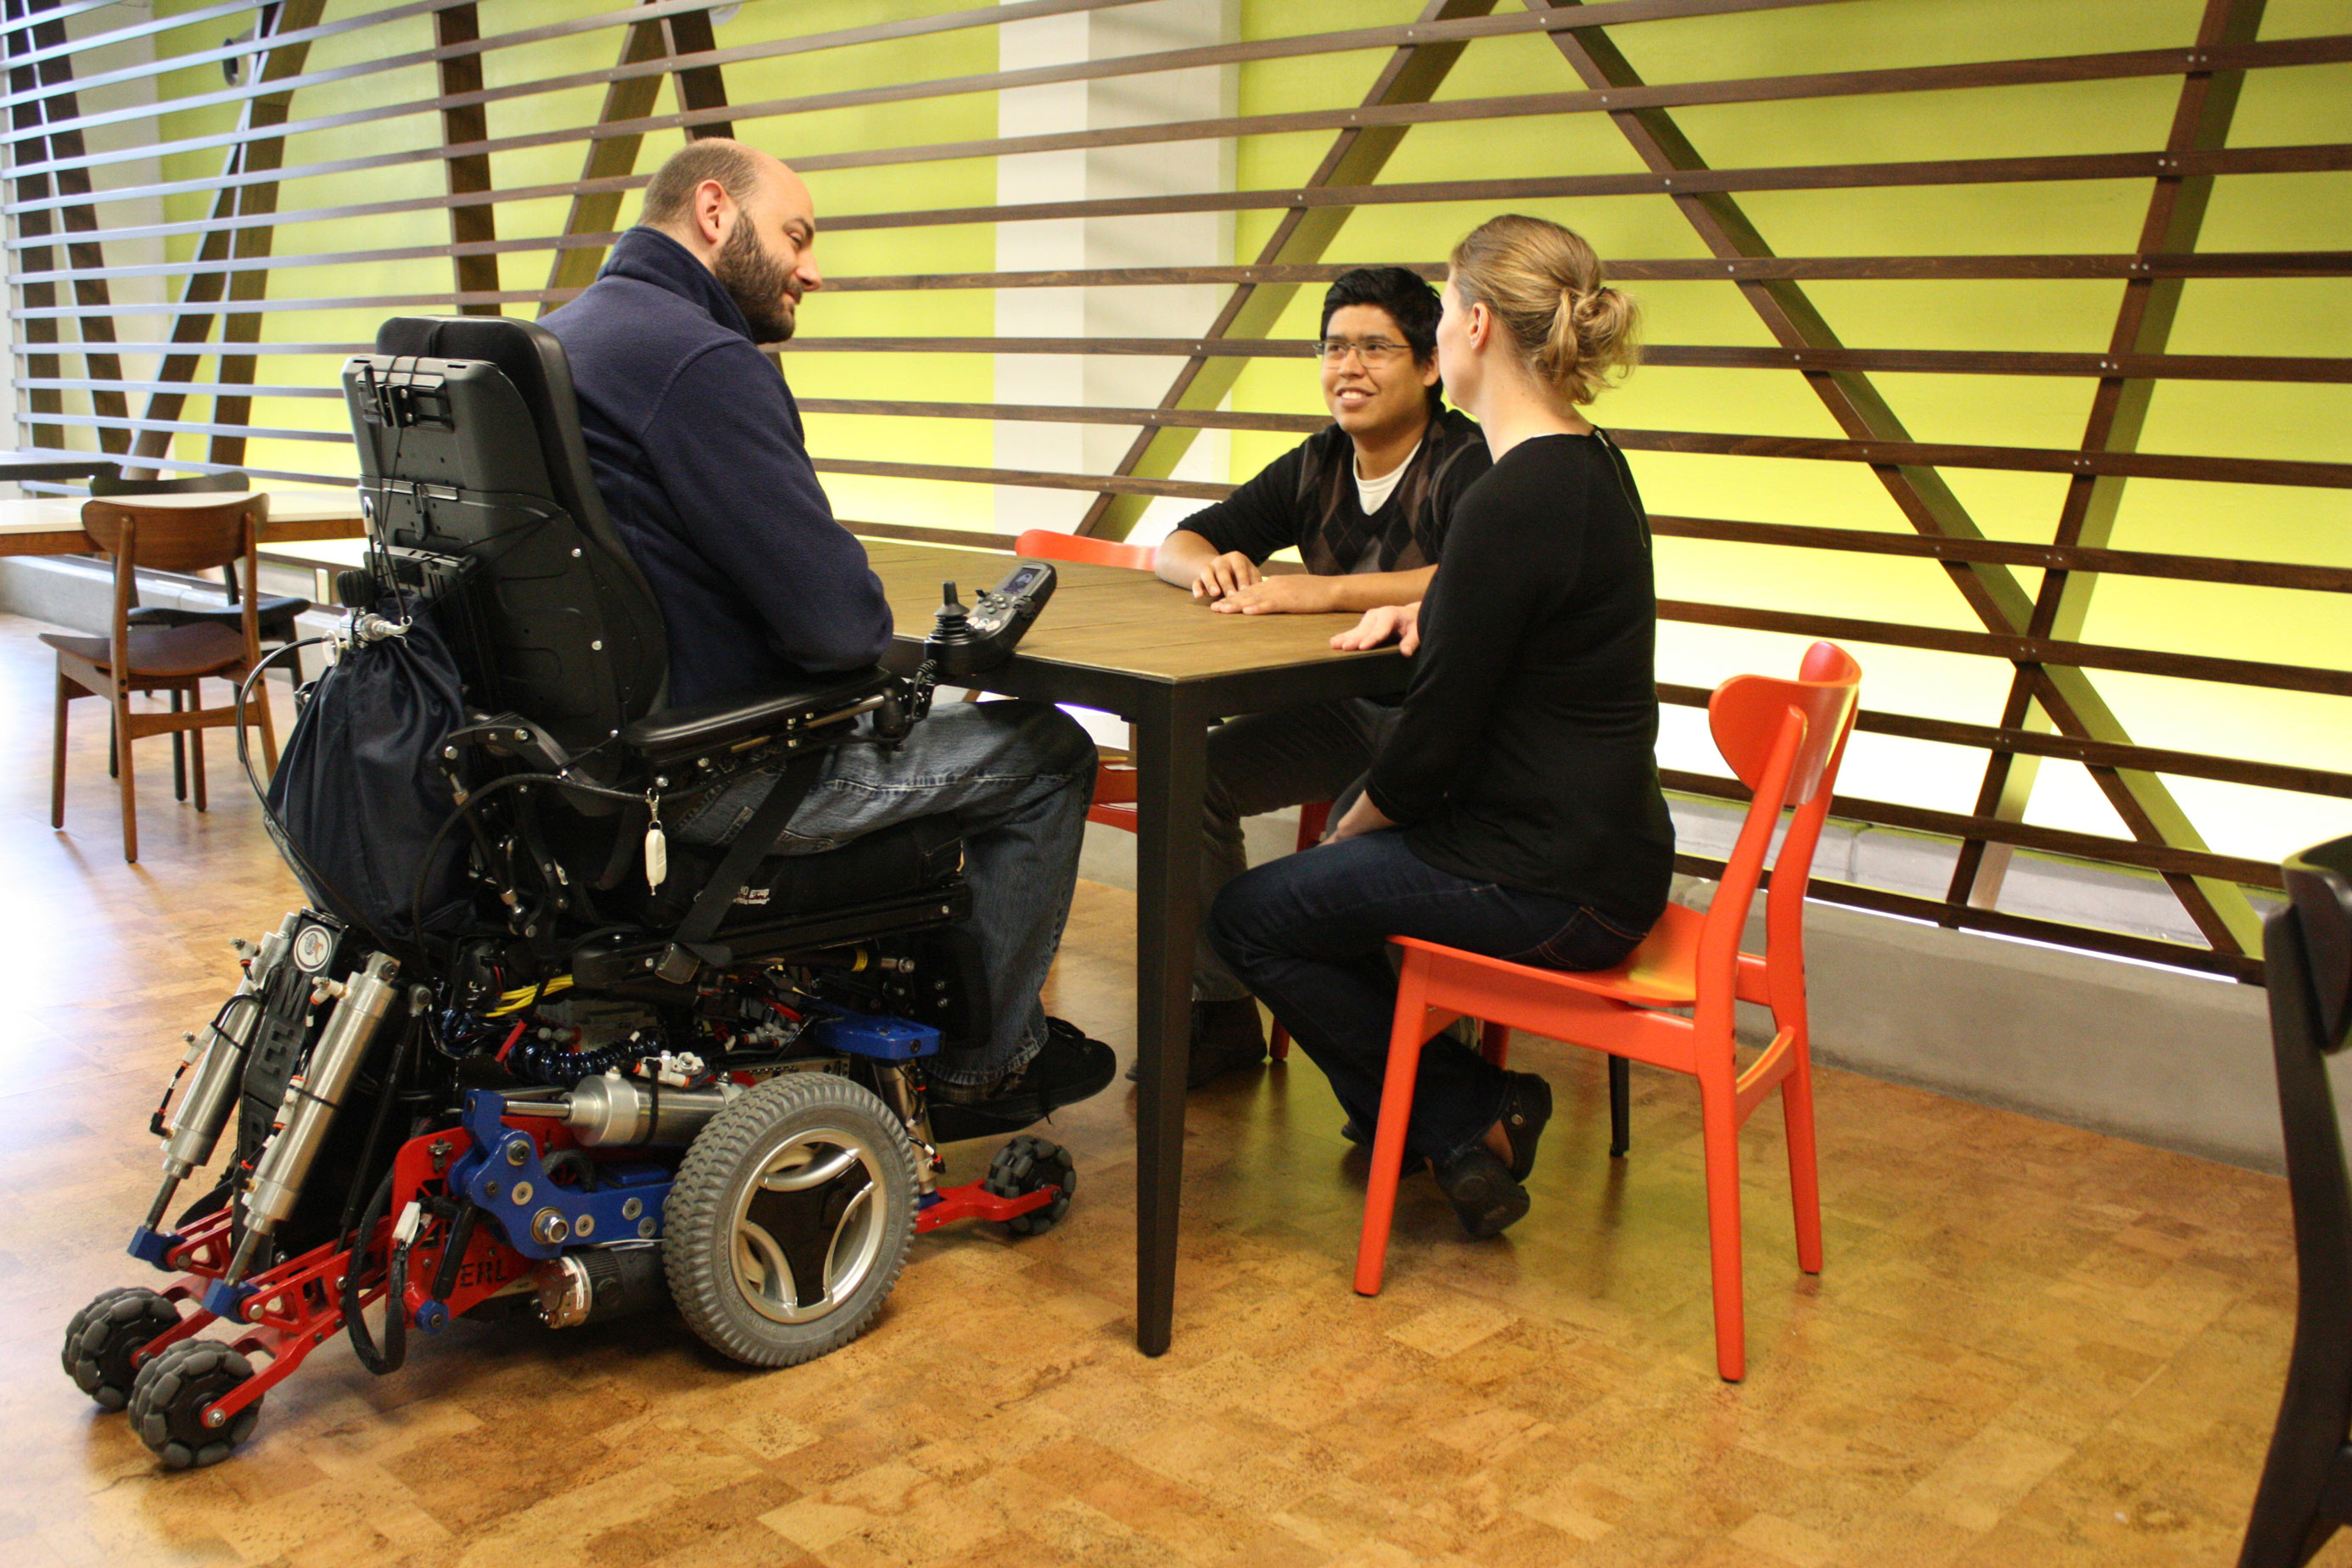 Photograph of three people sitting at a low table. In the foreground, a wheelchair user sitting in the MEBot is able to lower the height of his chair so he sits comfortably at the table.